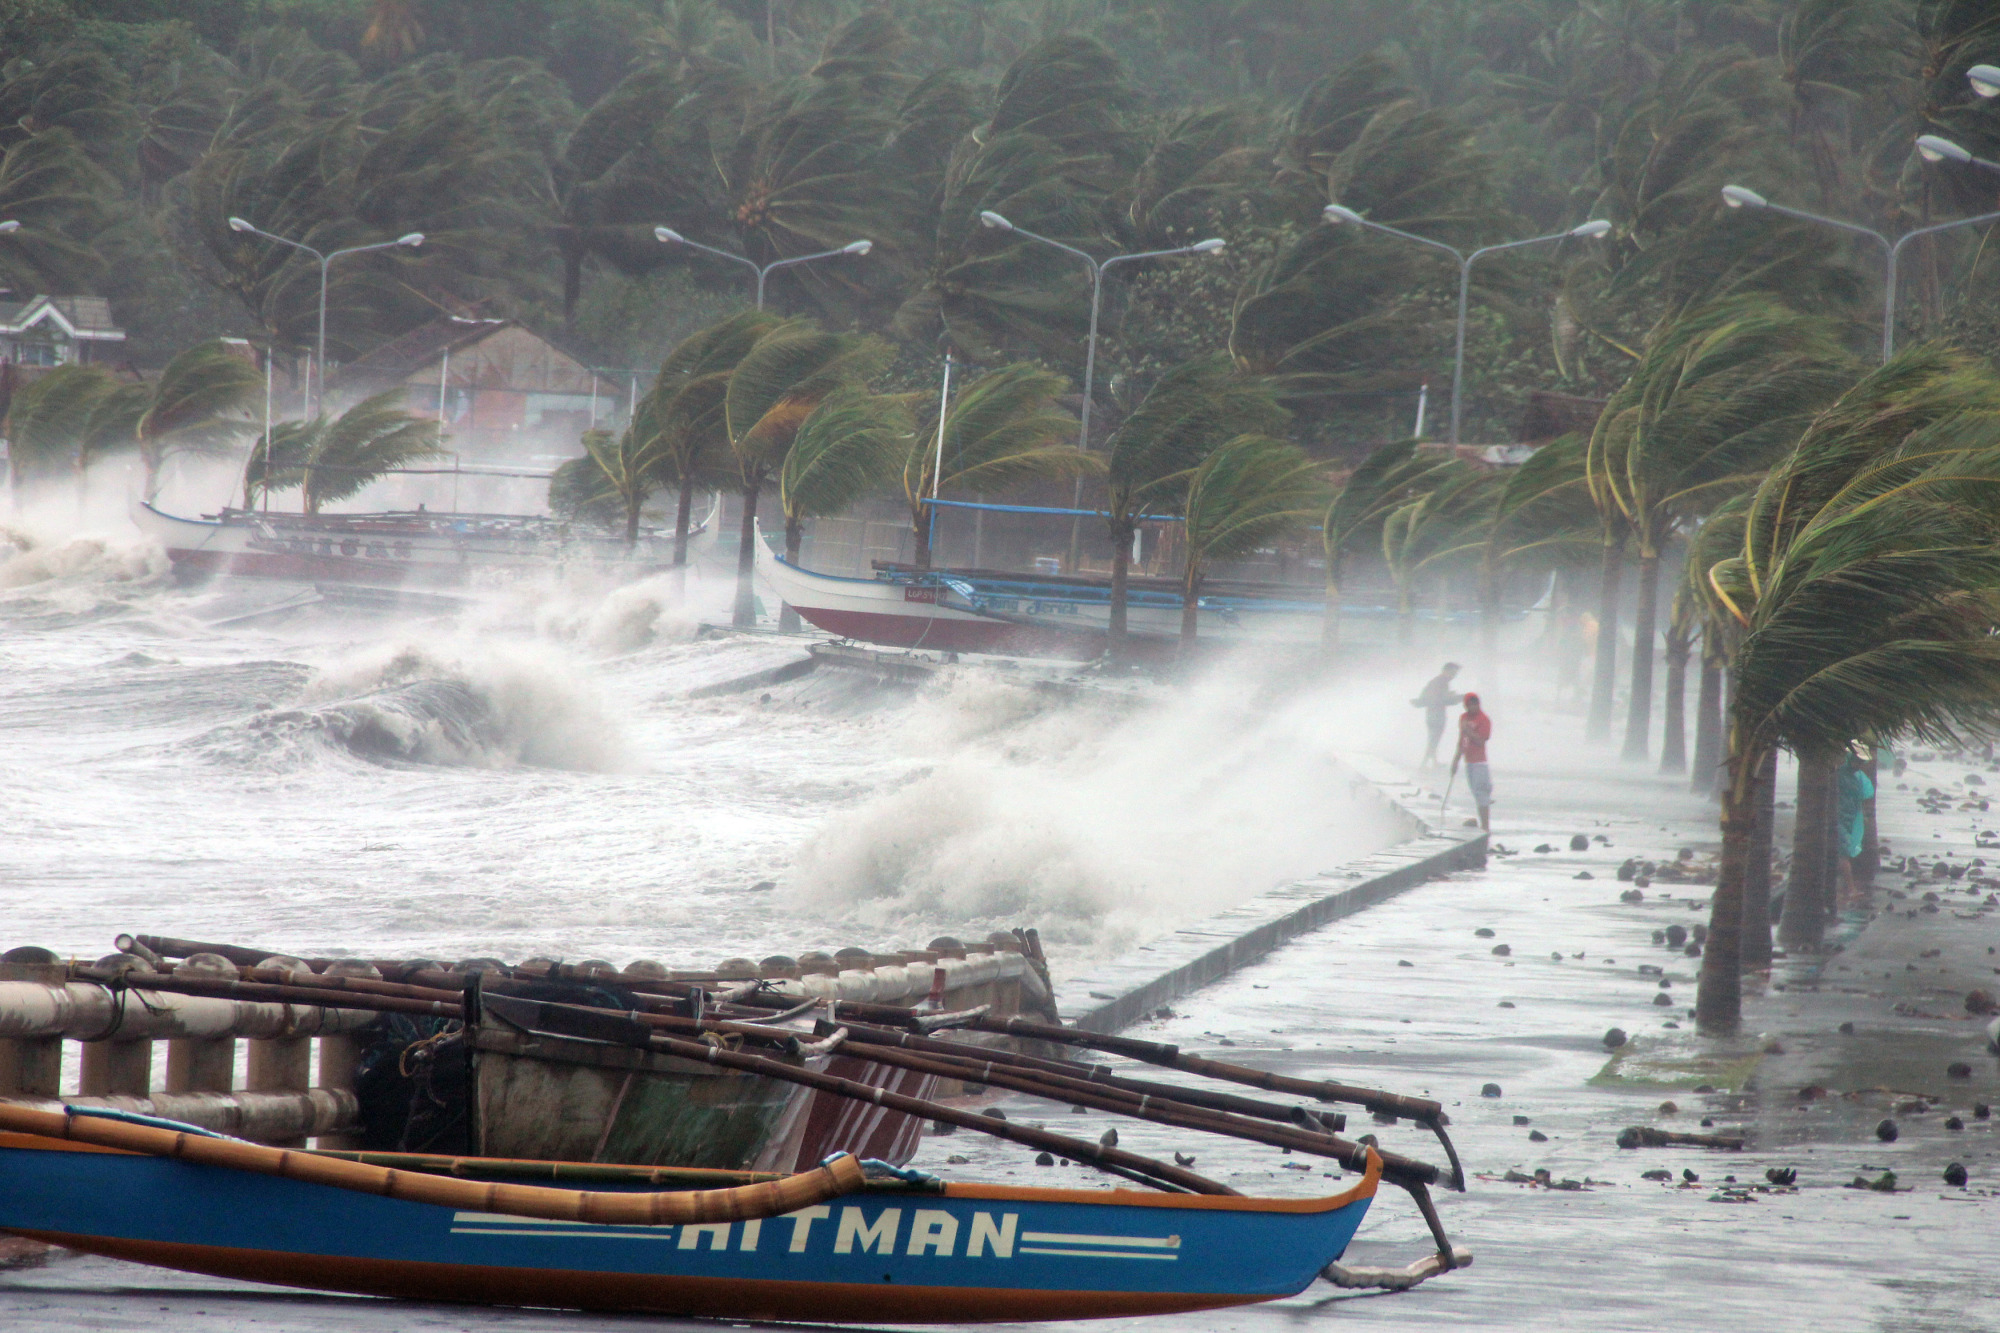 Residents stand along a sea wall as high waves pounded them amidst strong winds as Typhoon Haiyan hit the city of Legaspi, Albay province, south of Manila on November 8, 2013.